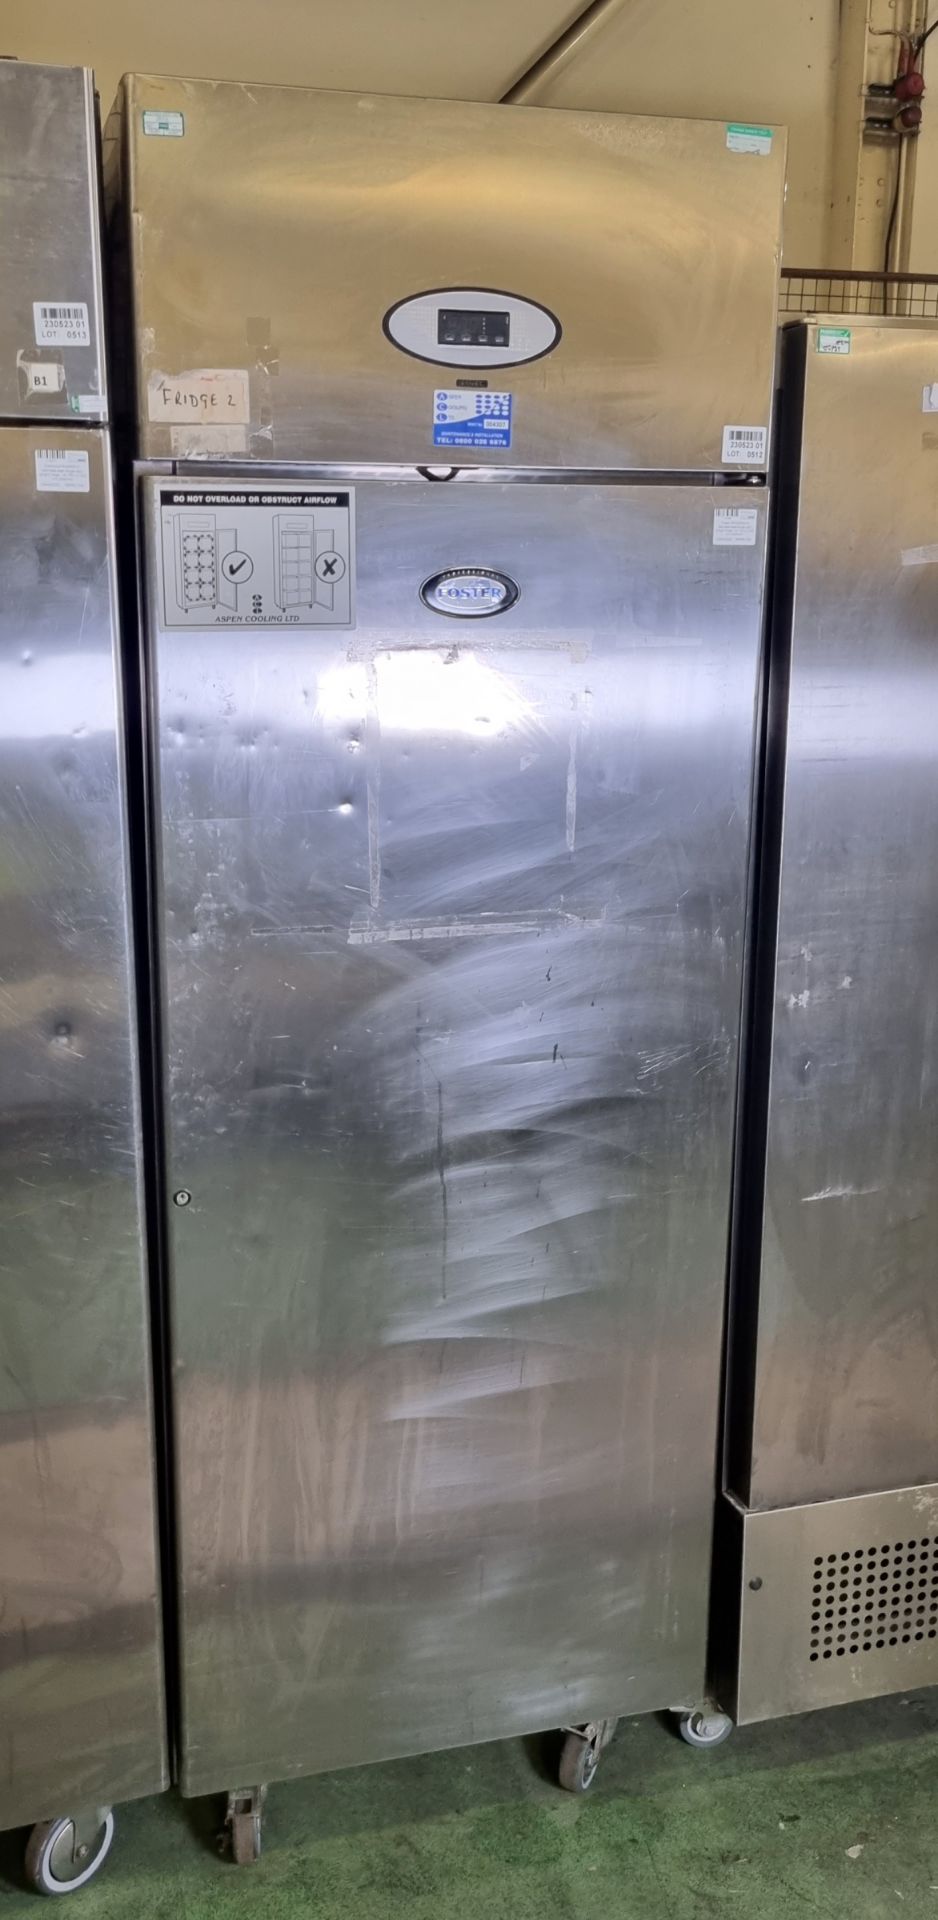 Foster PROG600H-A stainless steel single door upright fridge - W 700 x D 820 x H 2080mm - Image 2 of 4